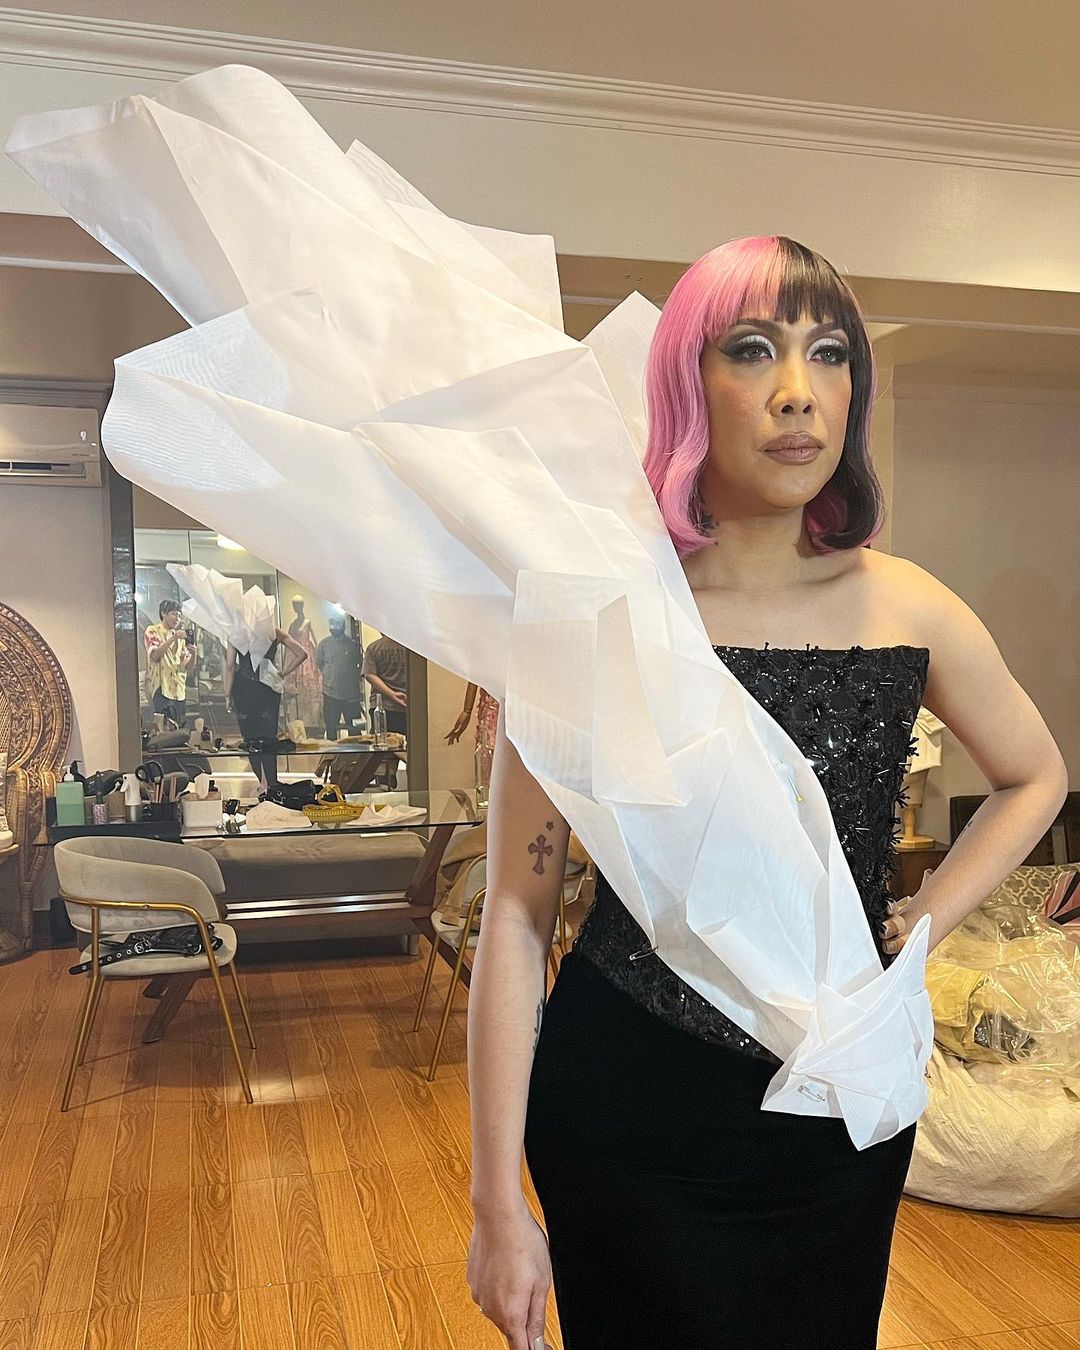 Daily Tribune - LOOK: Vice Ganda is a vision as a bride, modeling